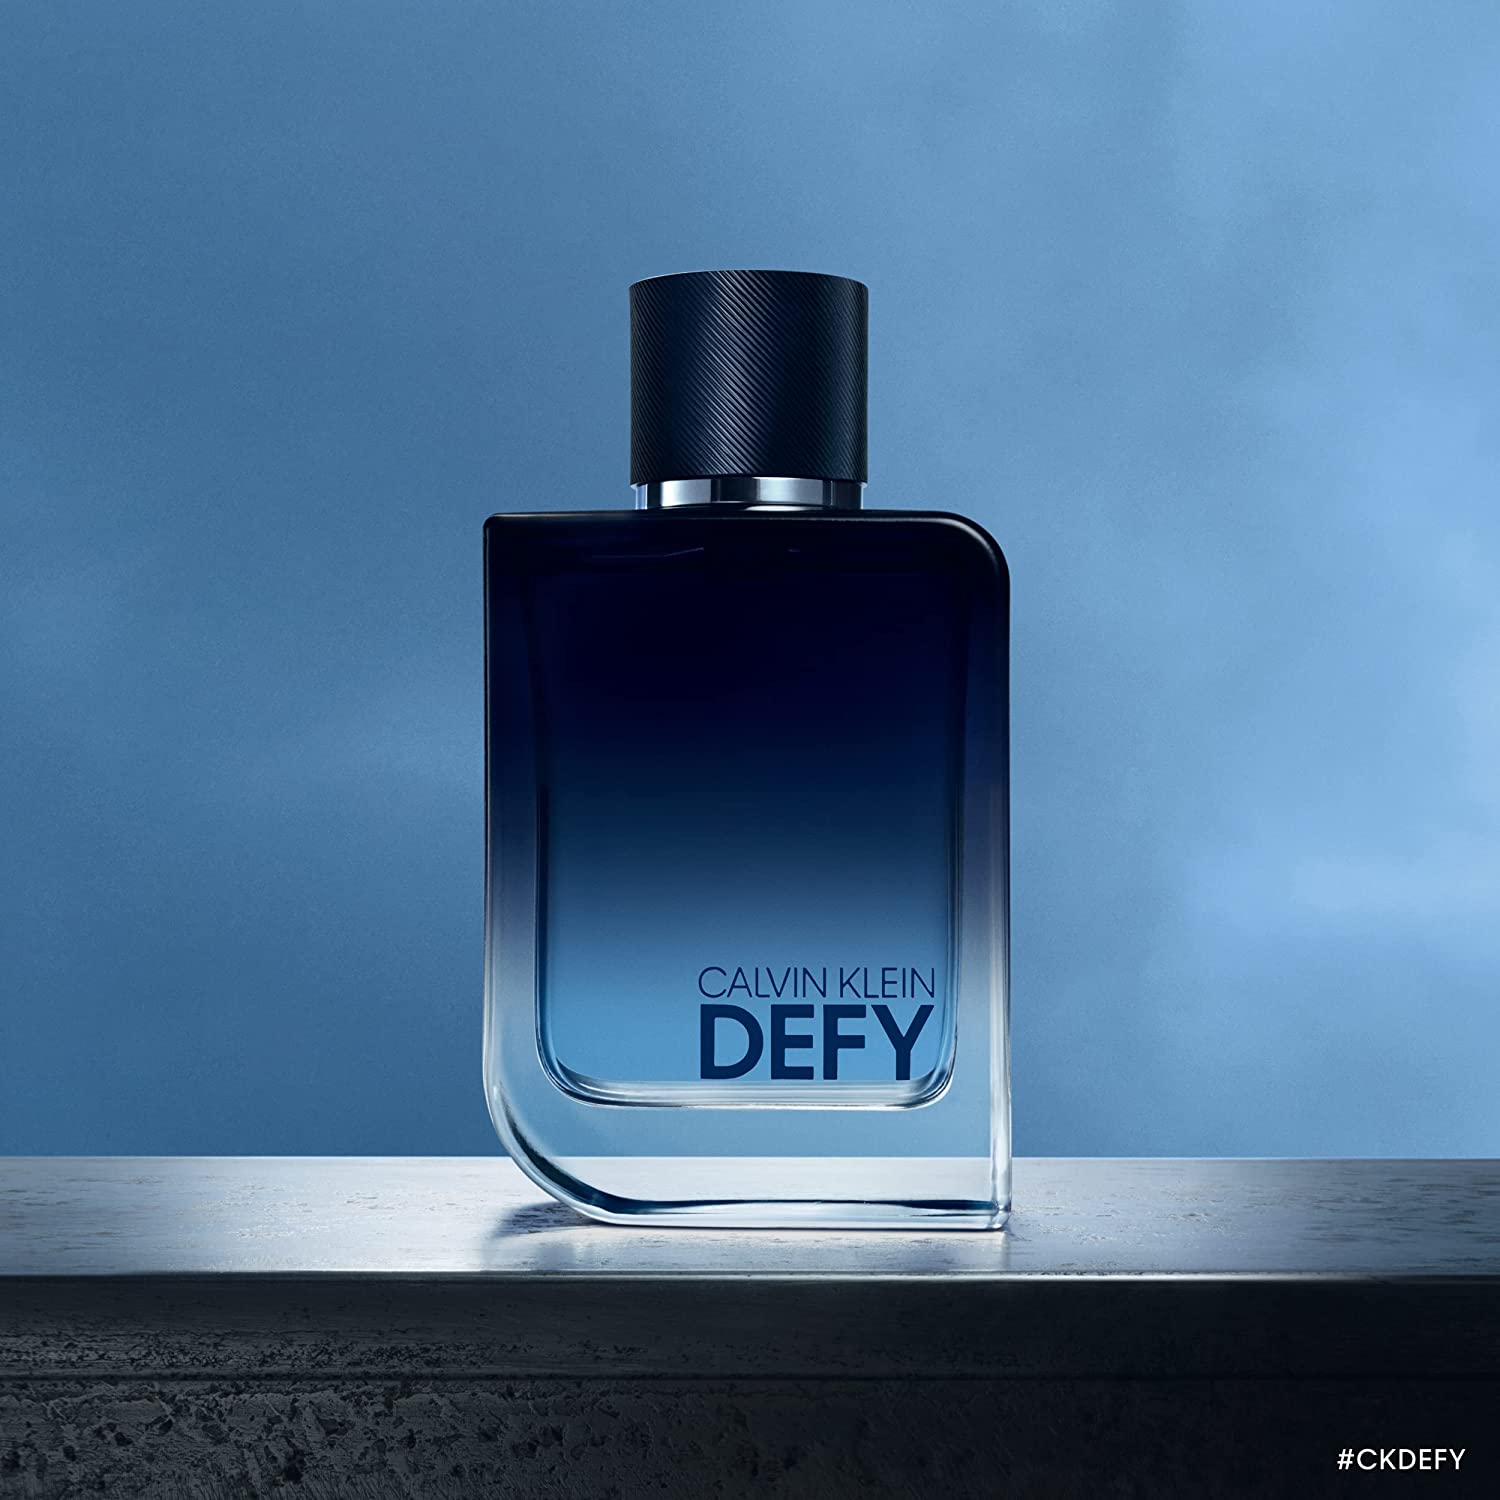 Calvin Klein Defy EdP: A Ripe And Fruity Leather ~ Fragrance Reviews